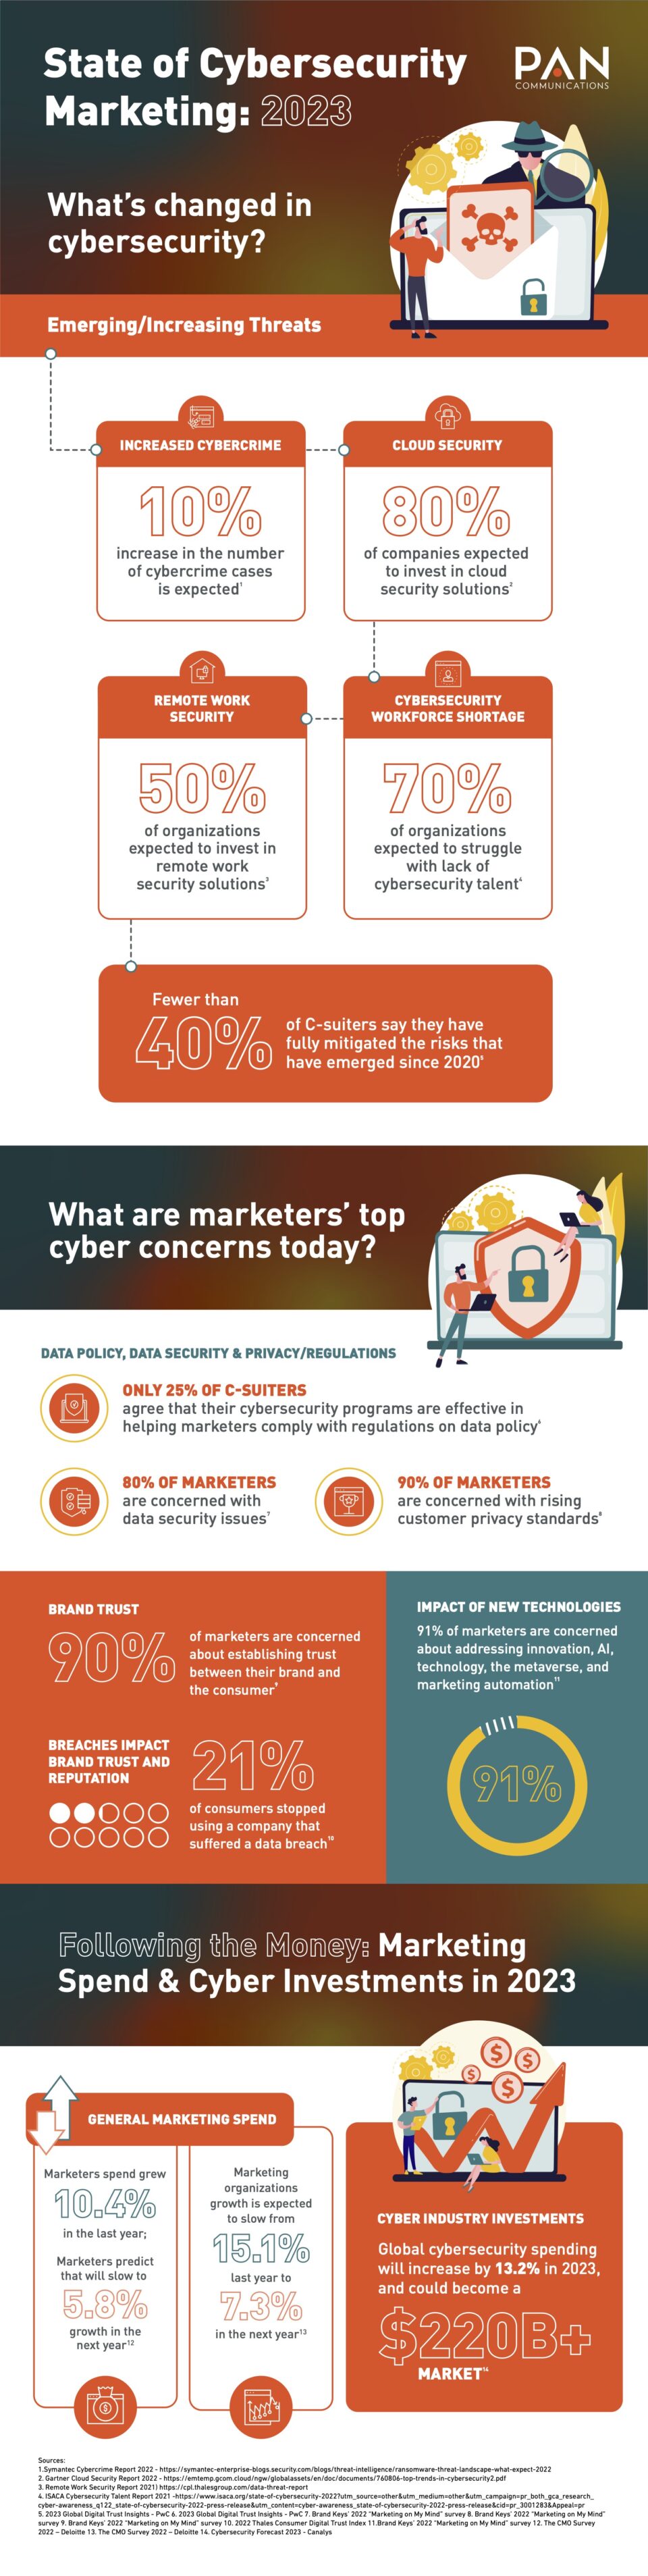 State of Cybersecurity Marketing in 2023 - PAN Communications